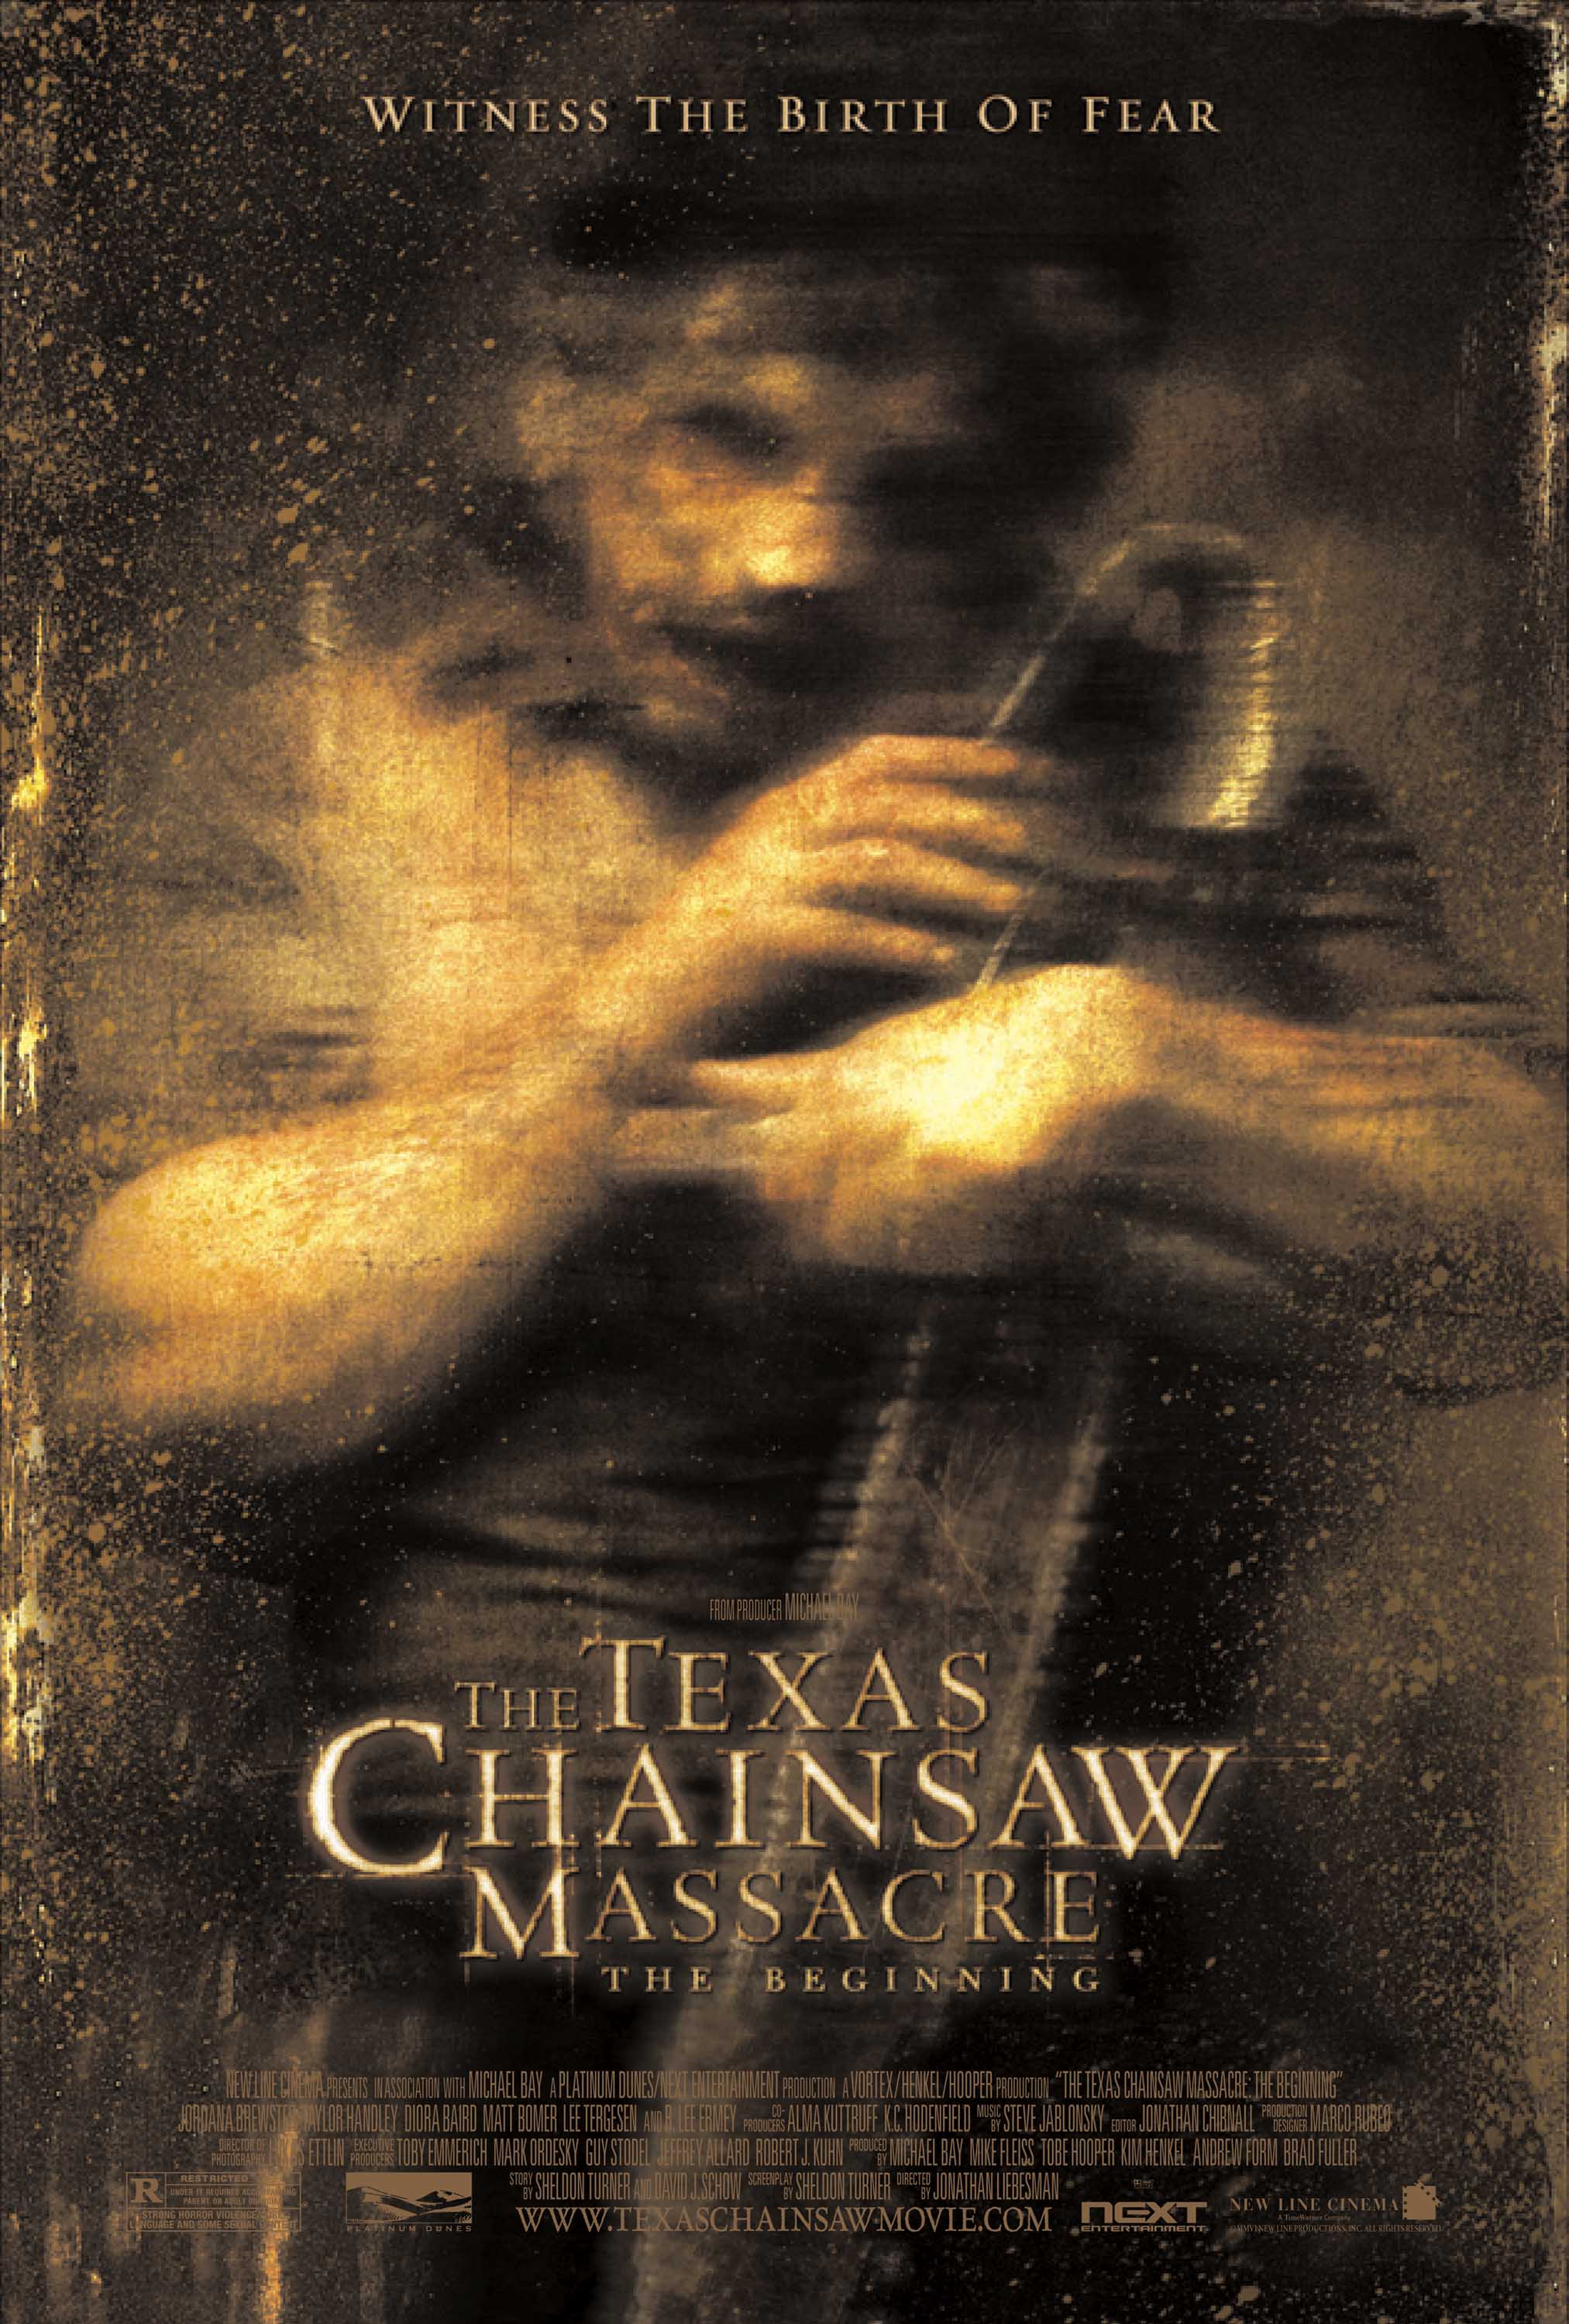 movie posters texas chainsaw massacre leatherface HD Wallpaper of